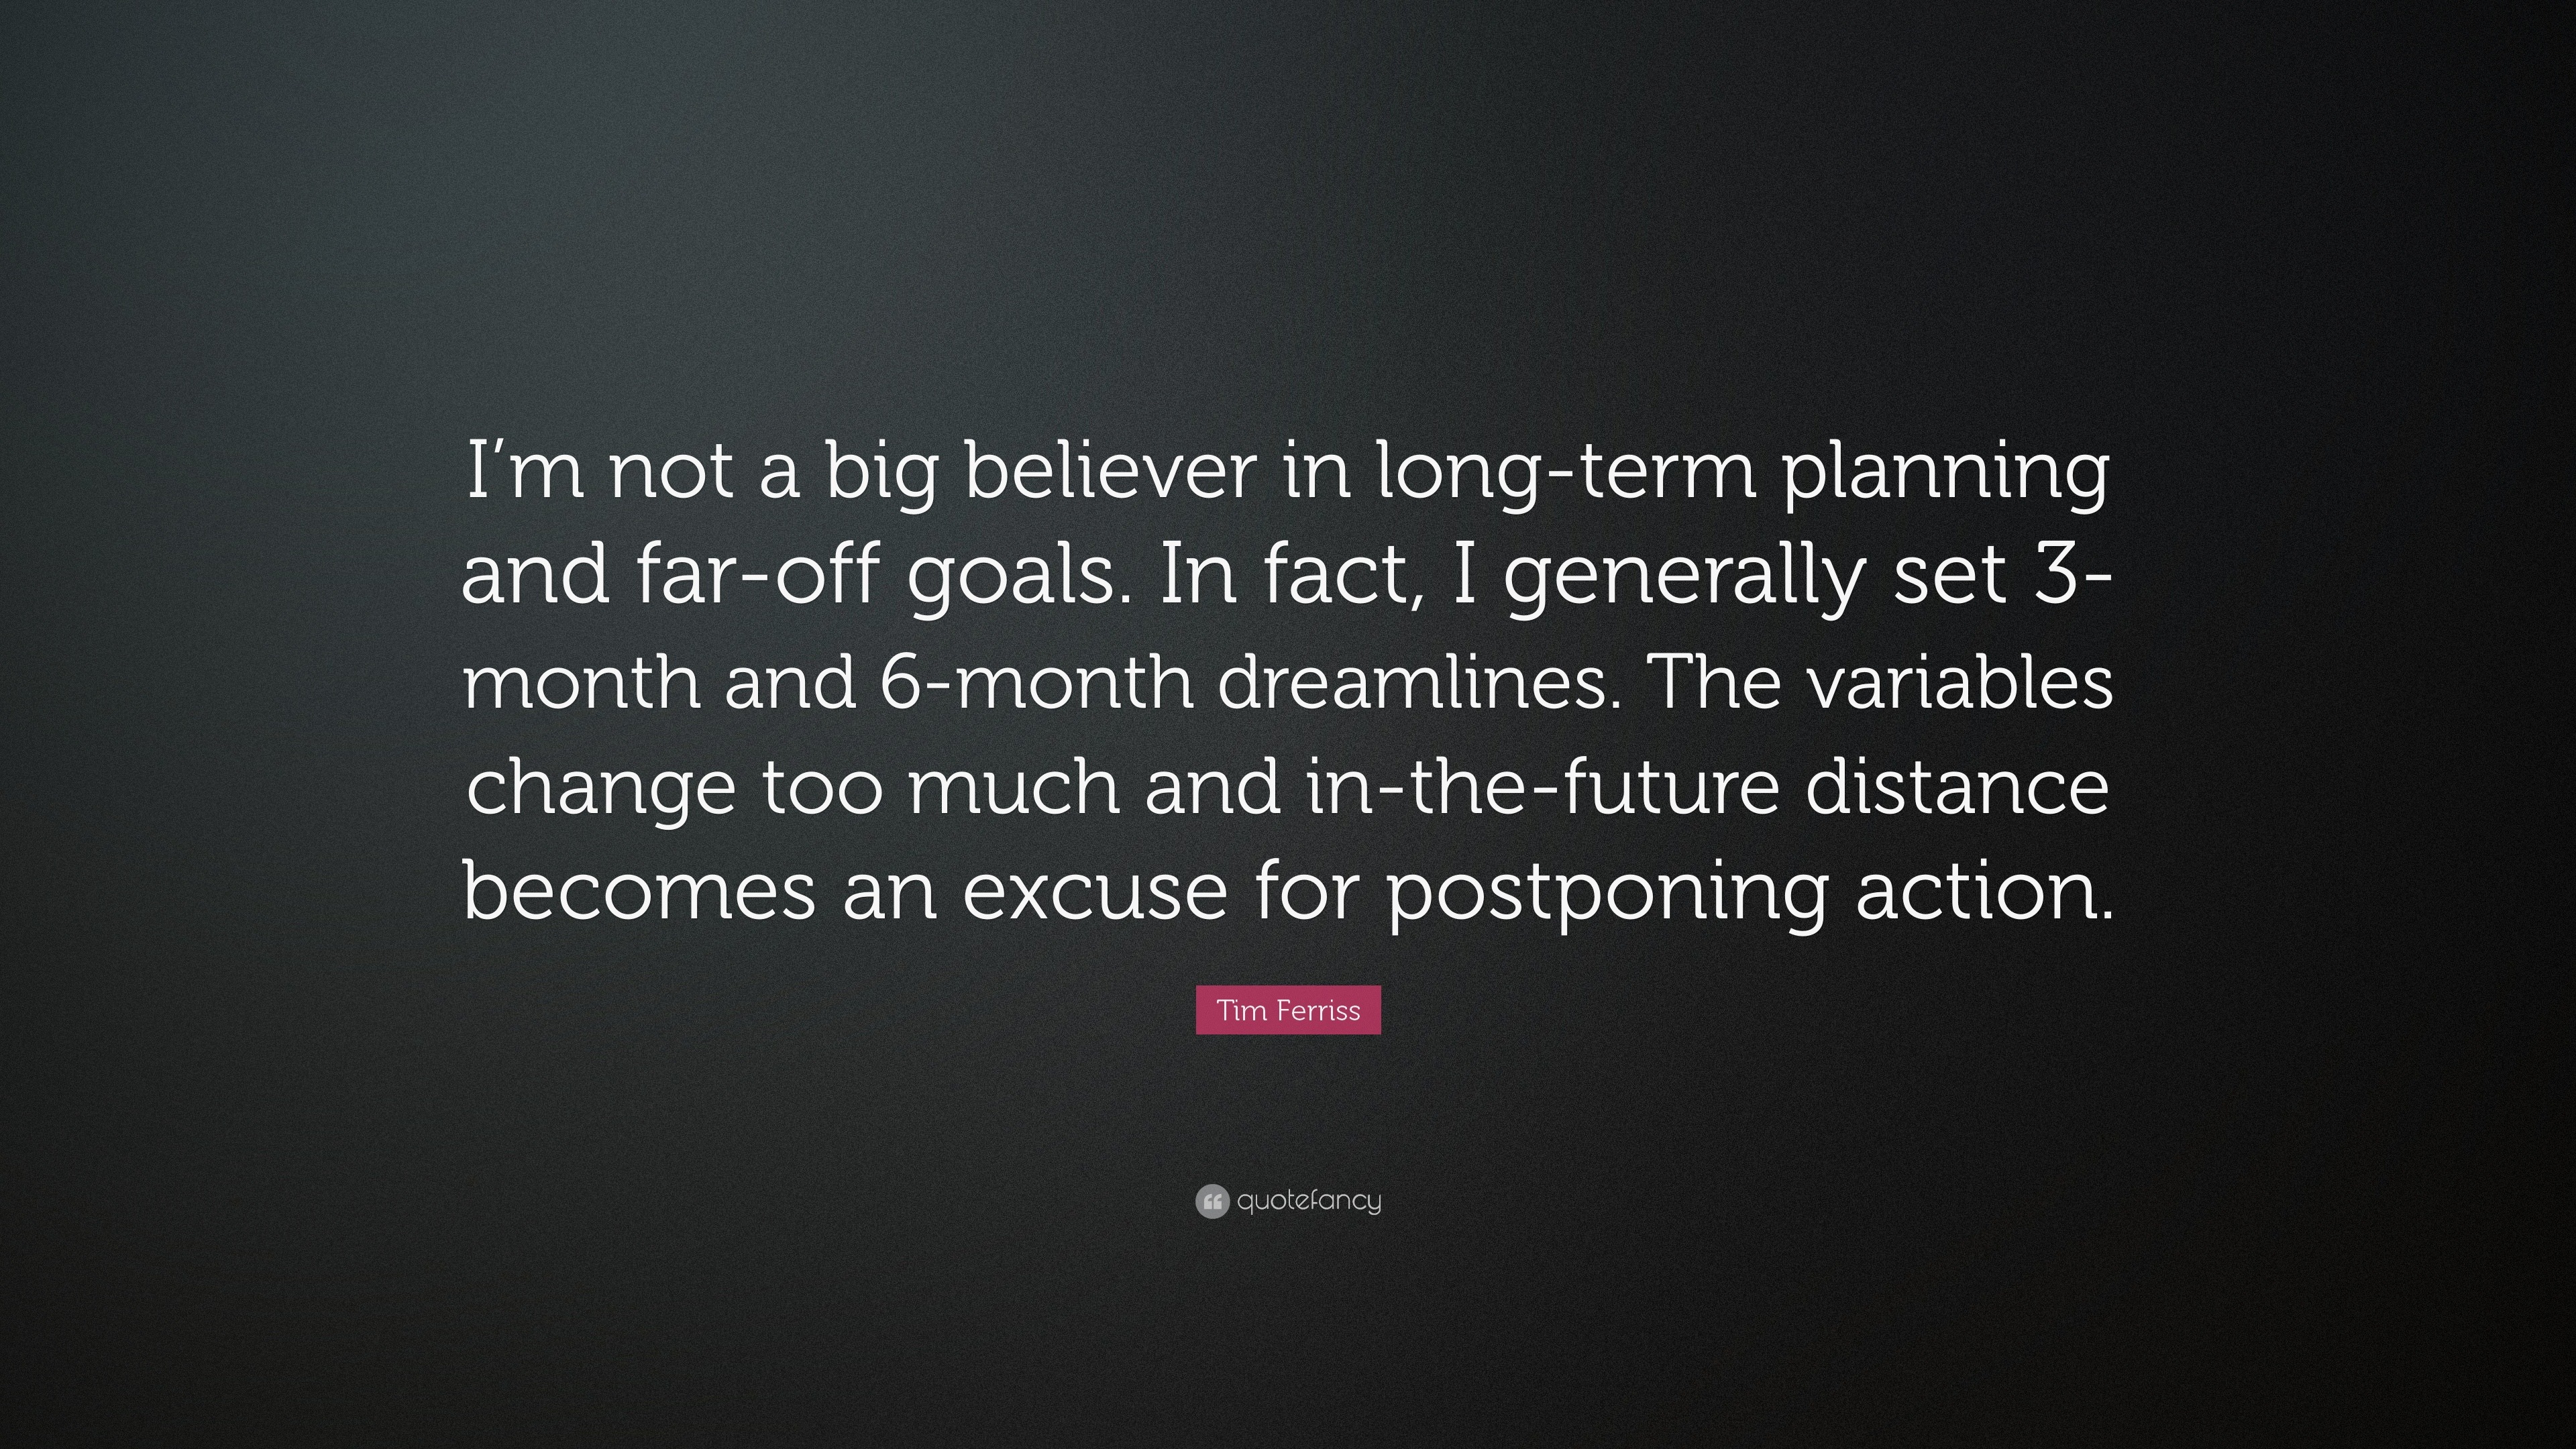 Tim Ferriss Quote: “I'm not a big believer in long-term planning and far-off goals. In fact, I generally set 3-month 6-month dreamlines....”